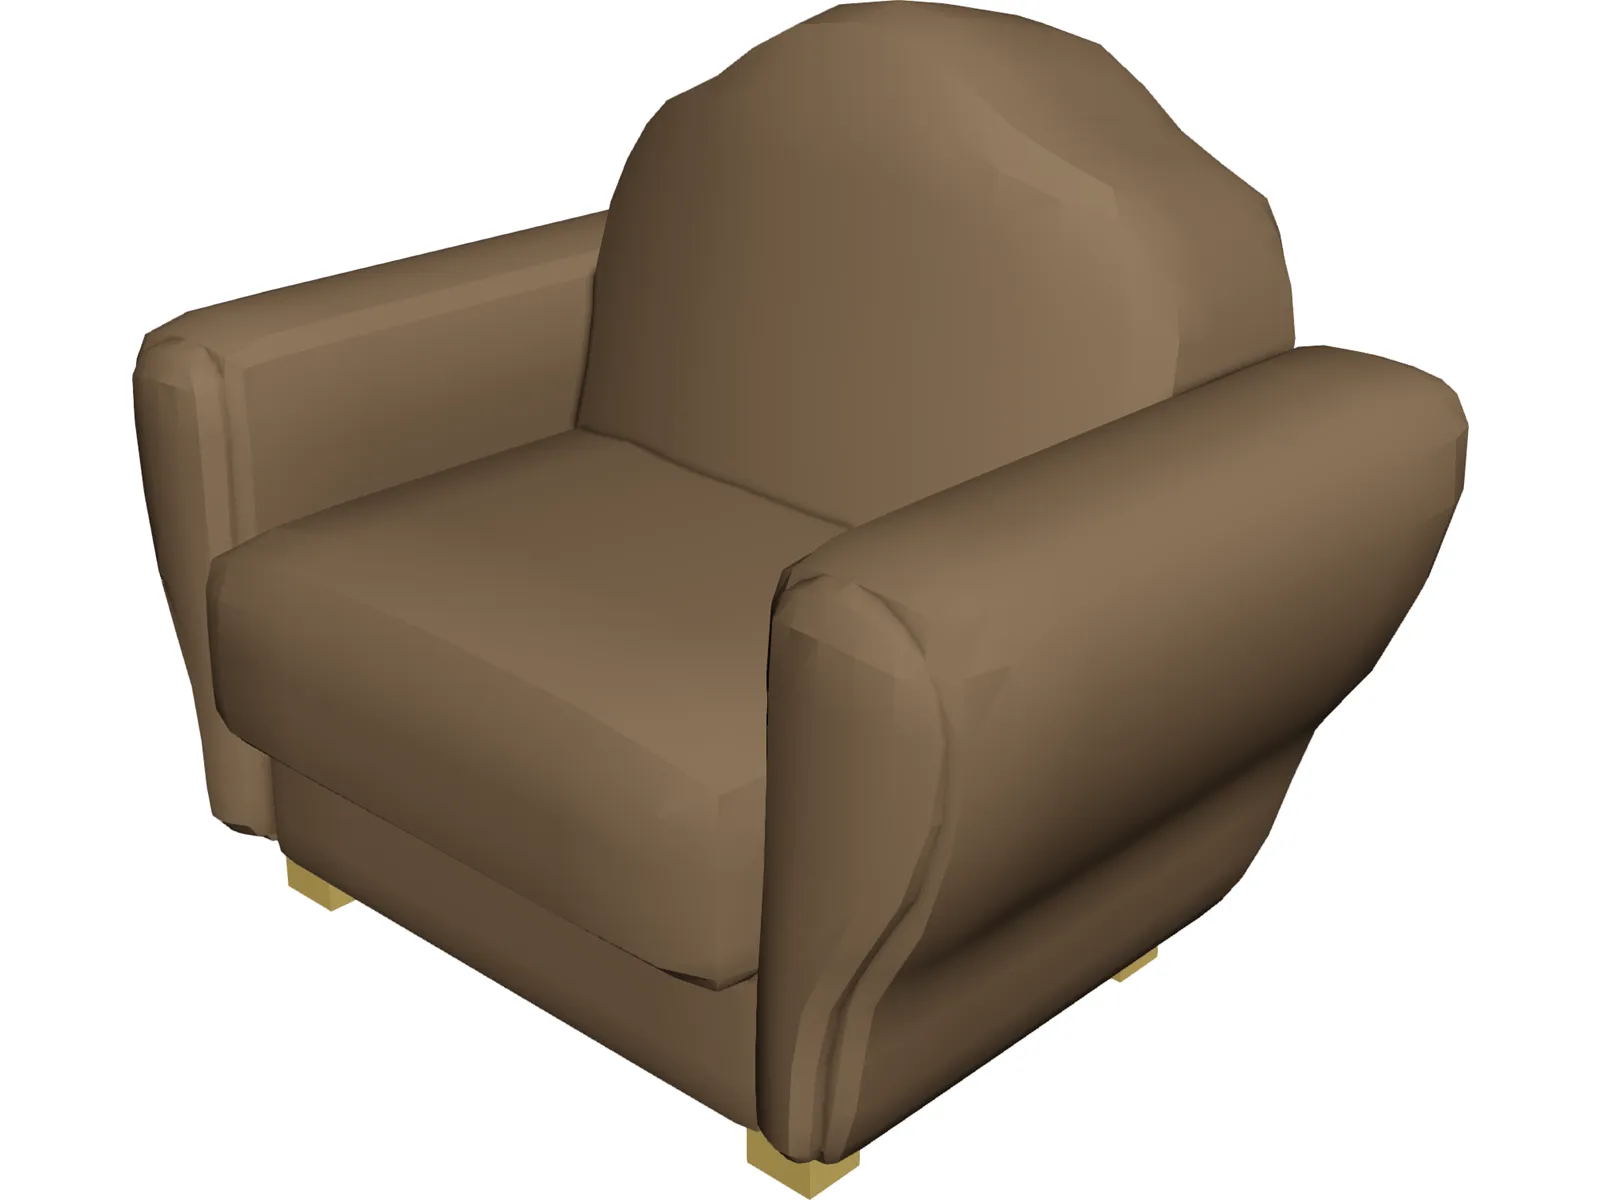 Chair Leather 3D Model